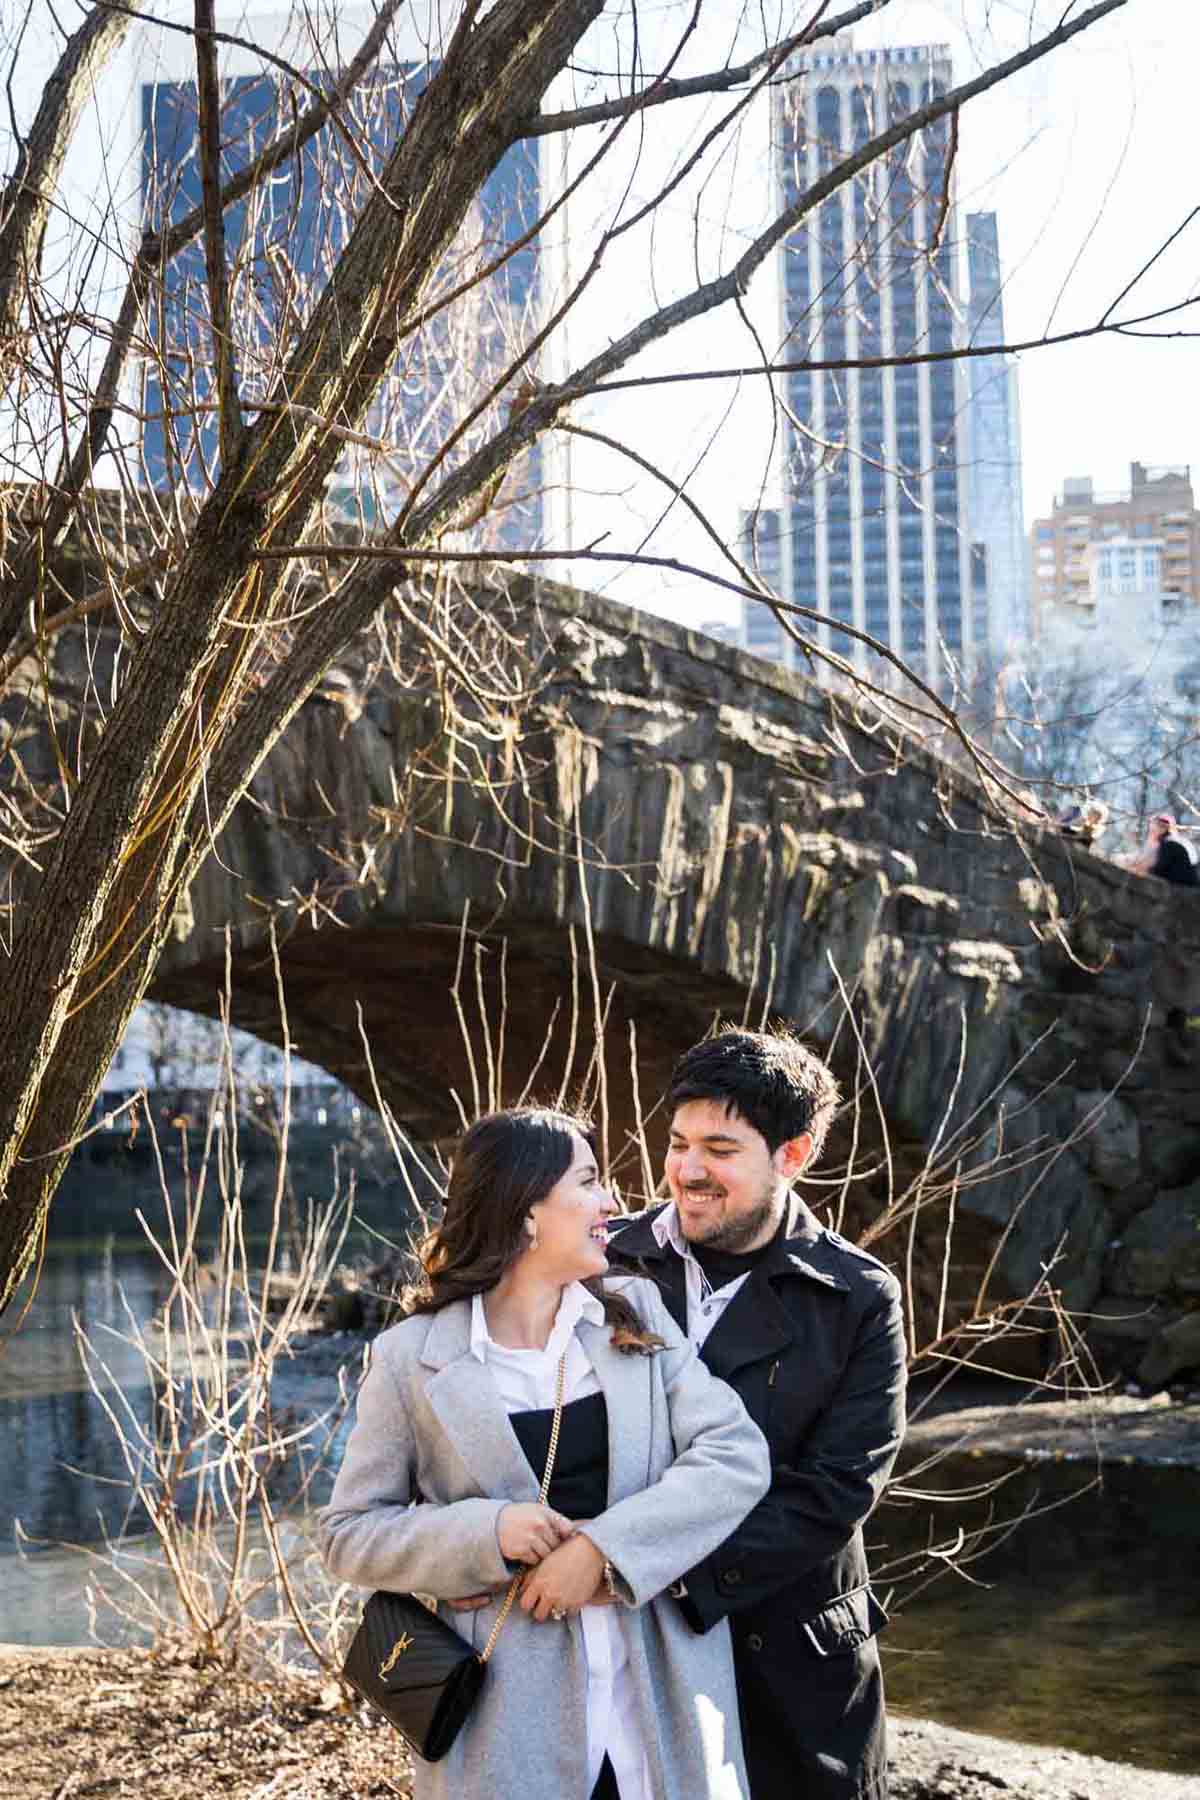 Couple hugging in front of bridge during a Gapstow Bridge surprise proposal in Central Park